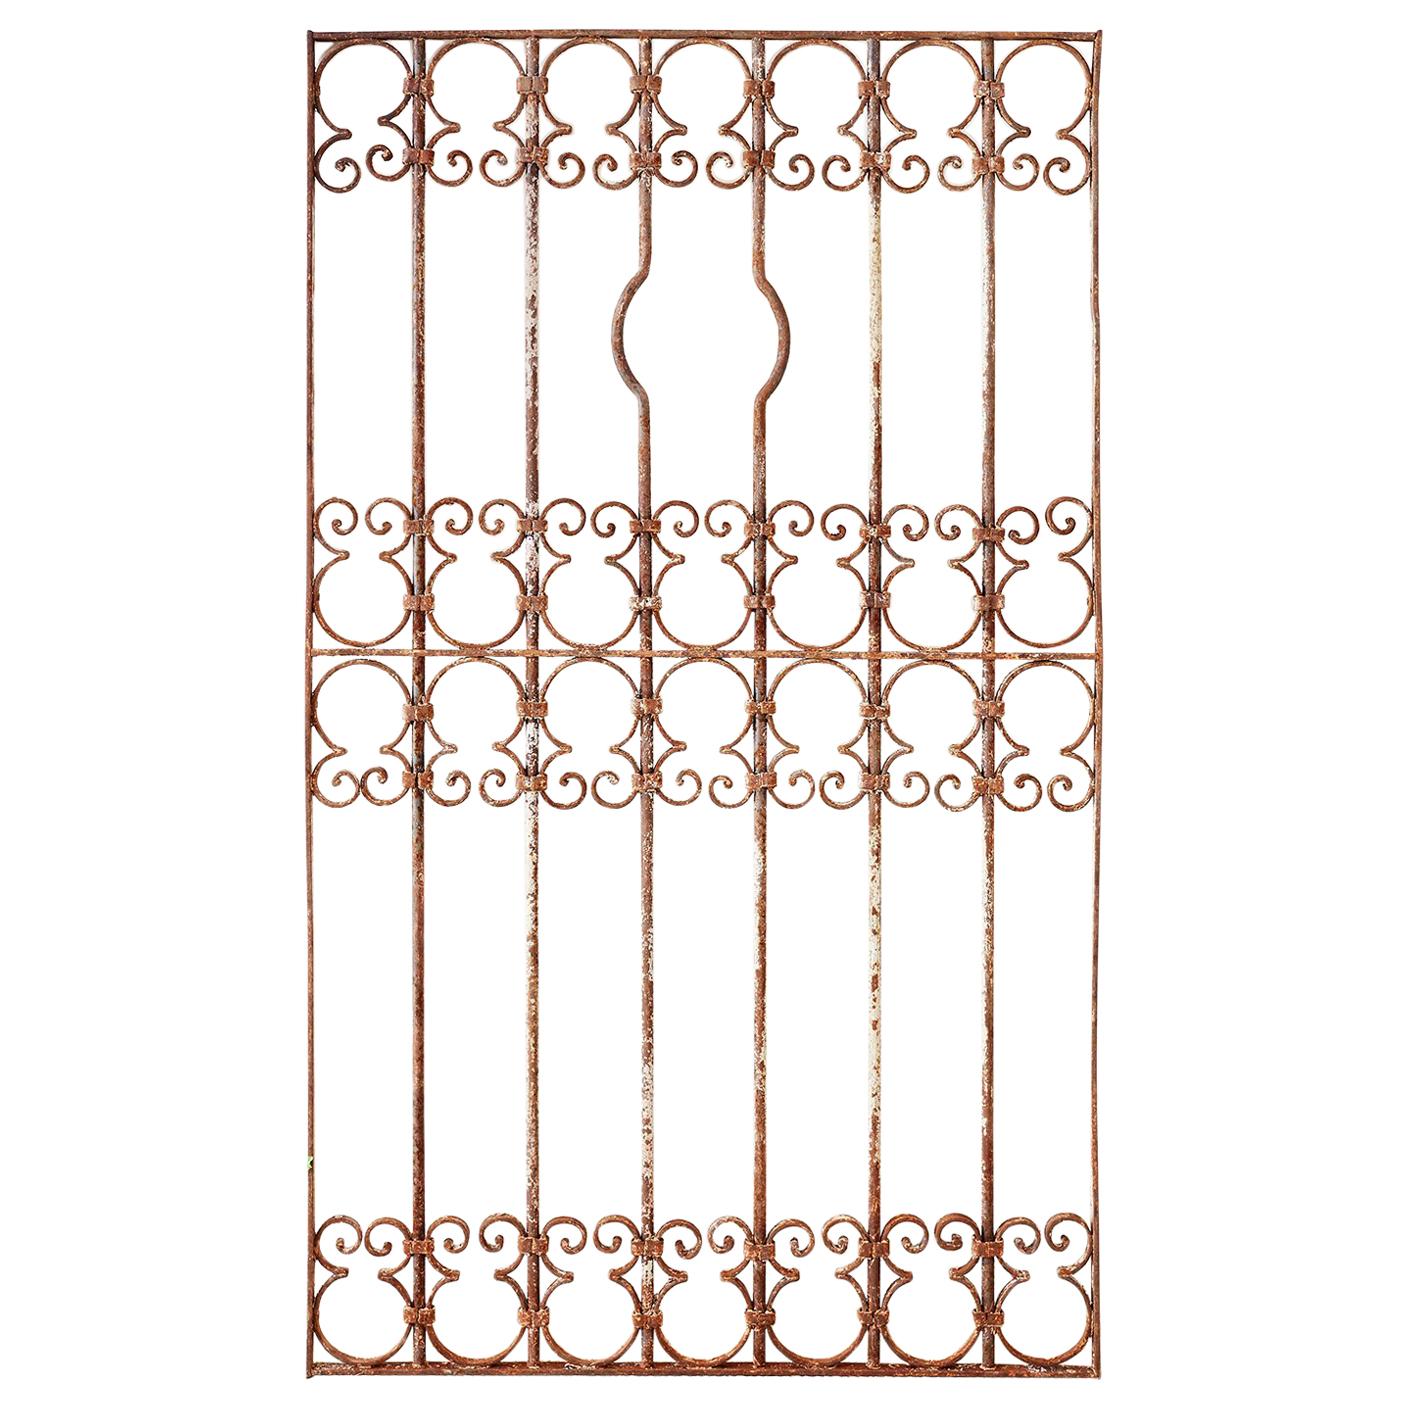 Spanish Wrought Iron Window Grill or Gate